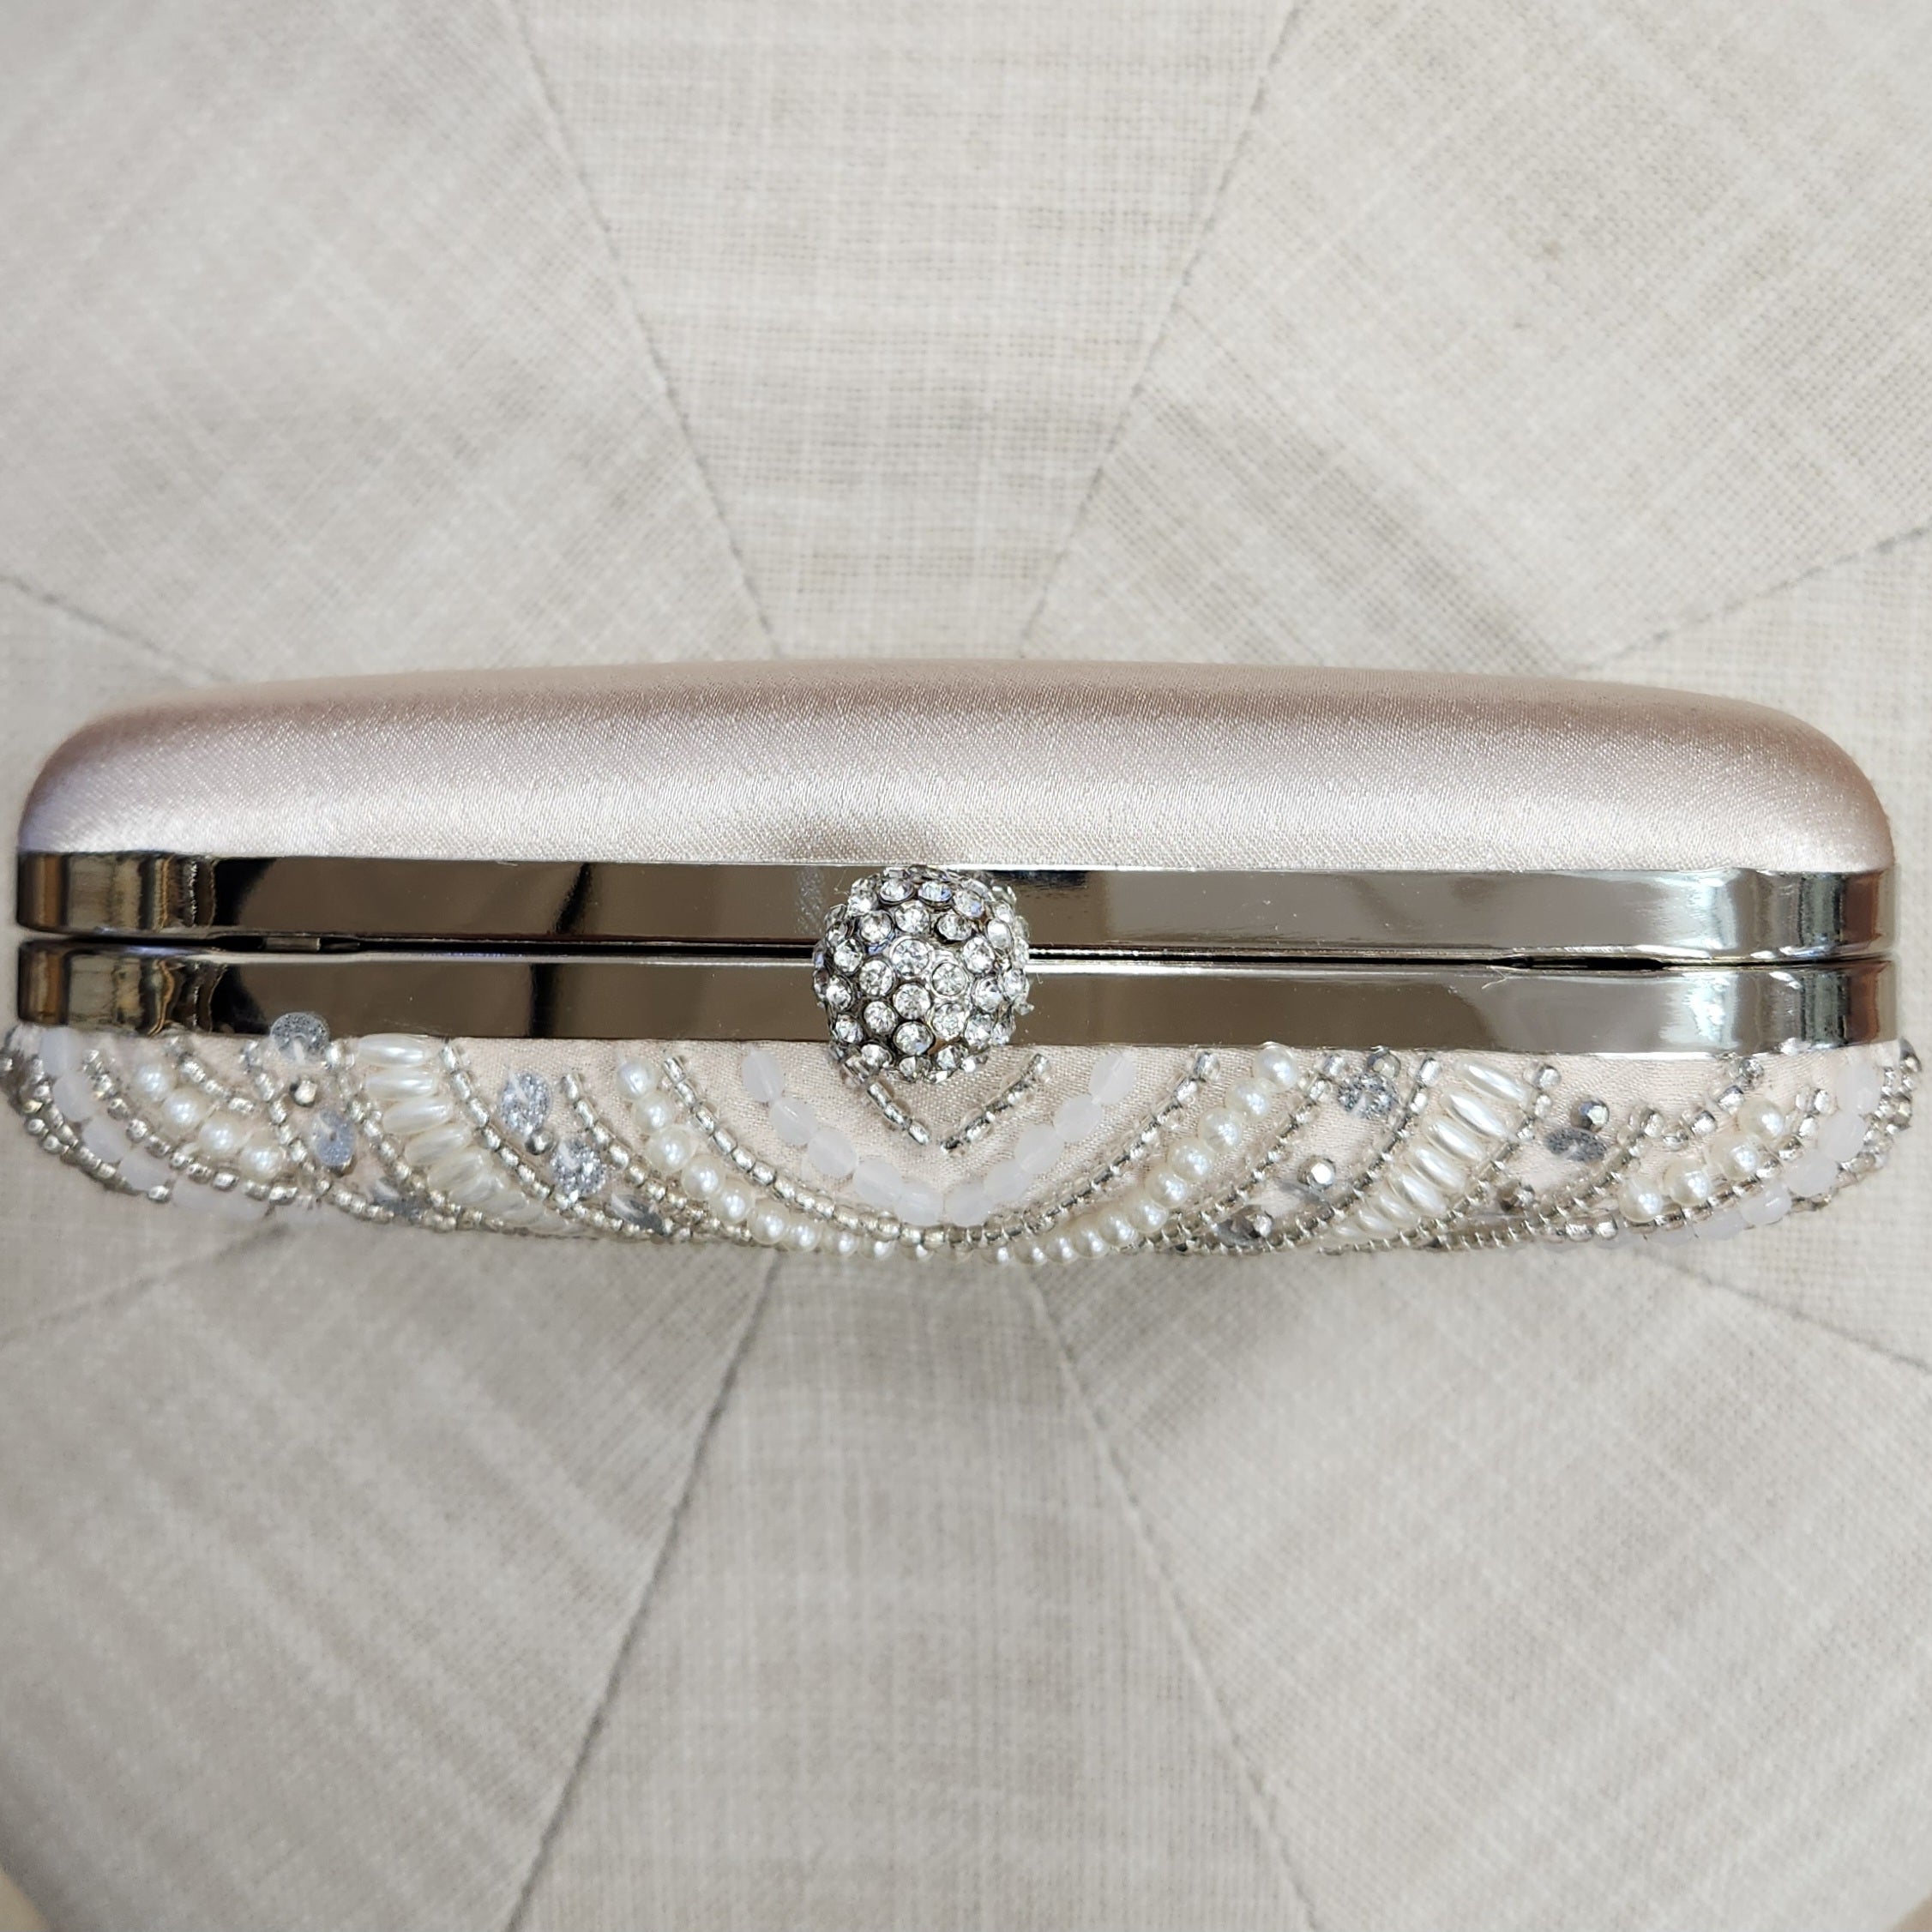 Anais - Champagne Beaded Clutch